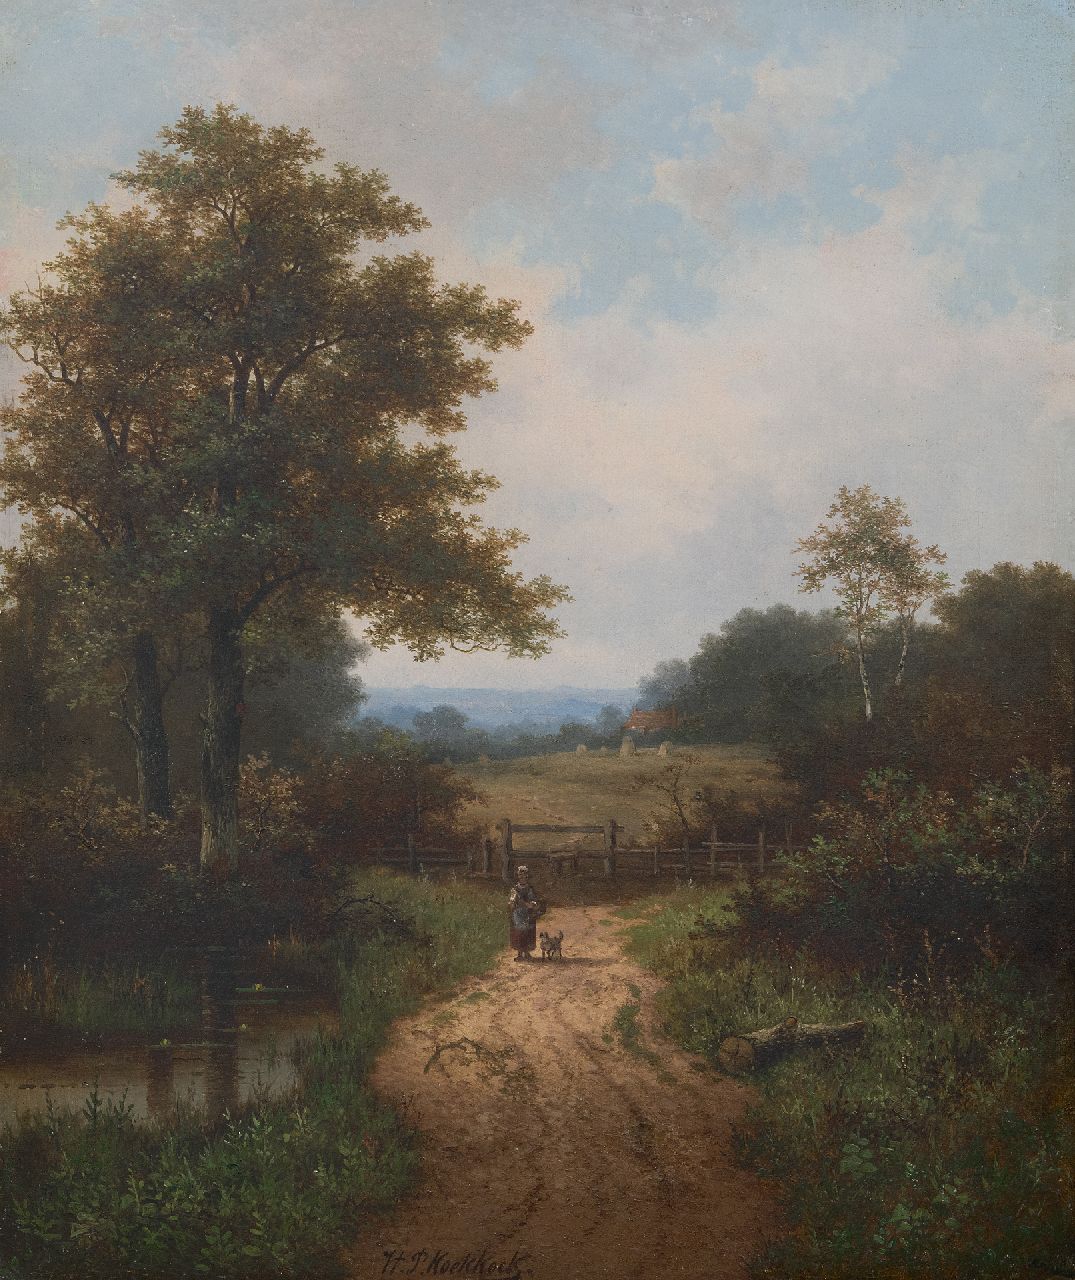 Koekkoek P.H.  | Pieter Hendrik 'H.P.' Koekkoek | Paintings offered for sale | Farmer's wife and dog on wooded country path, oil on canvas 61.0 x 50.7 cm, signed l.c.